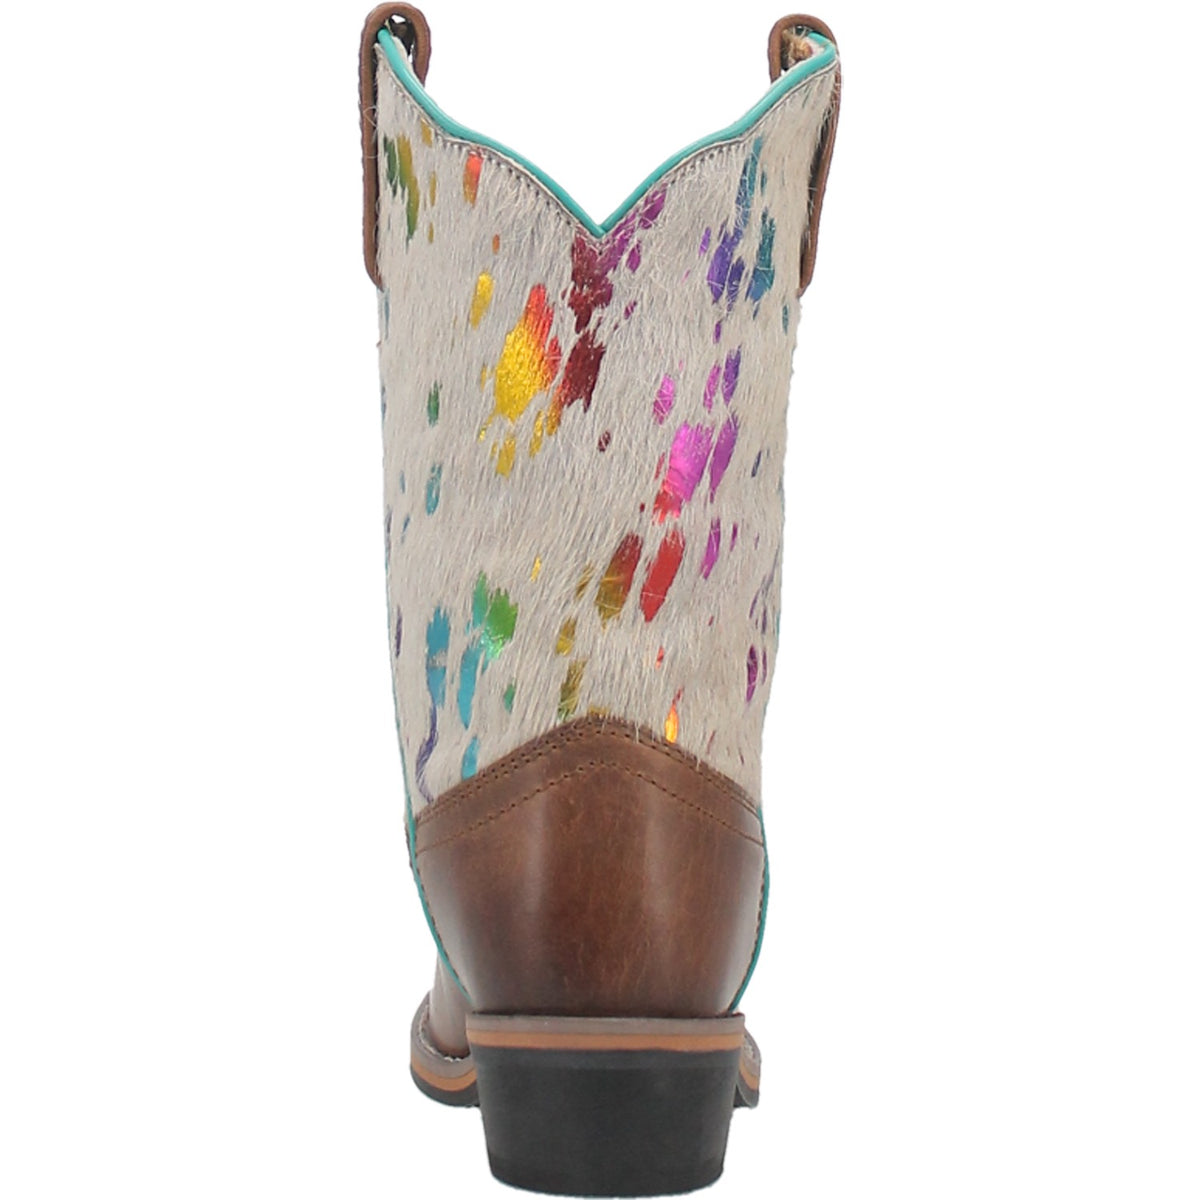 RUMI LEATHER CHILDREN'S BOOT Cover